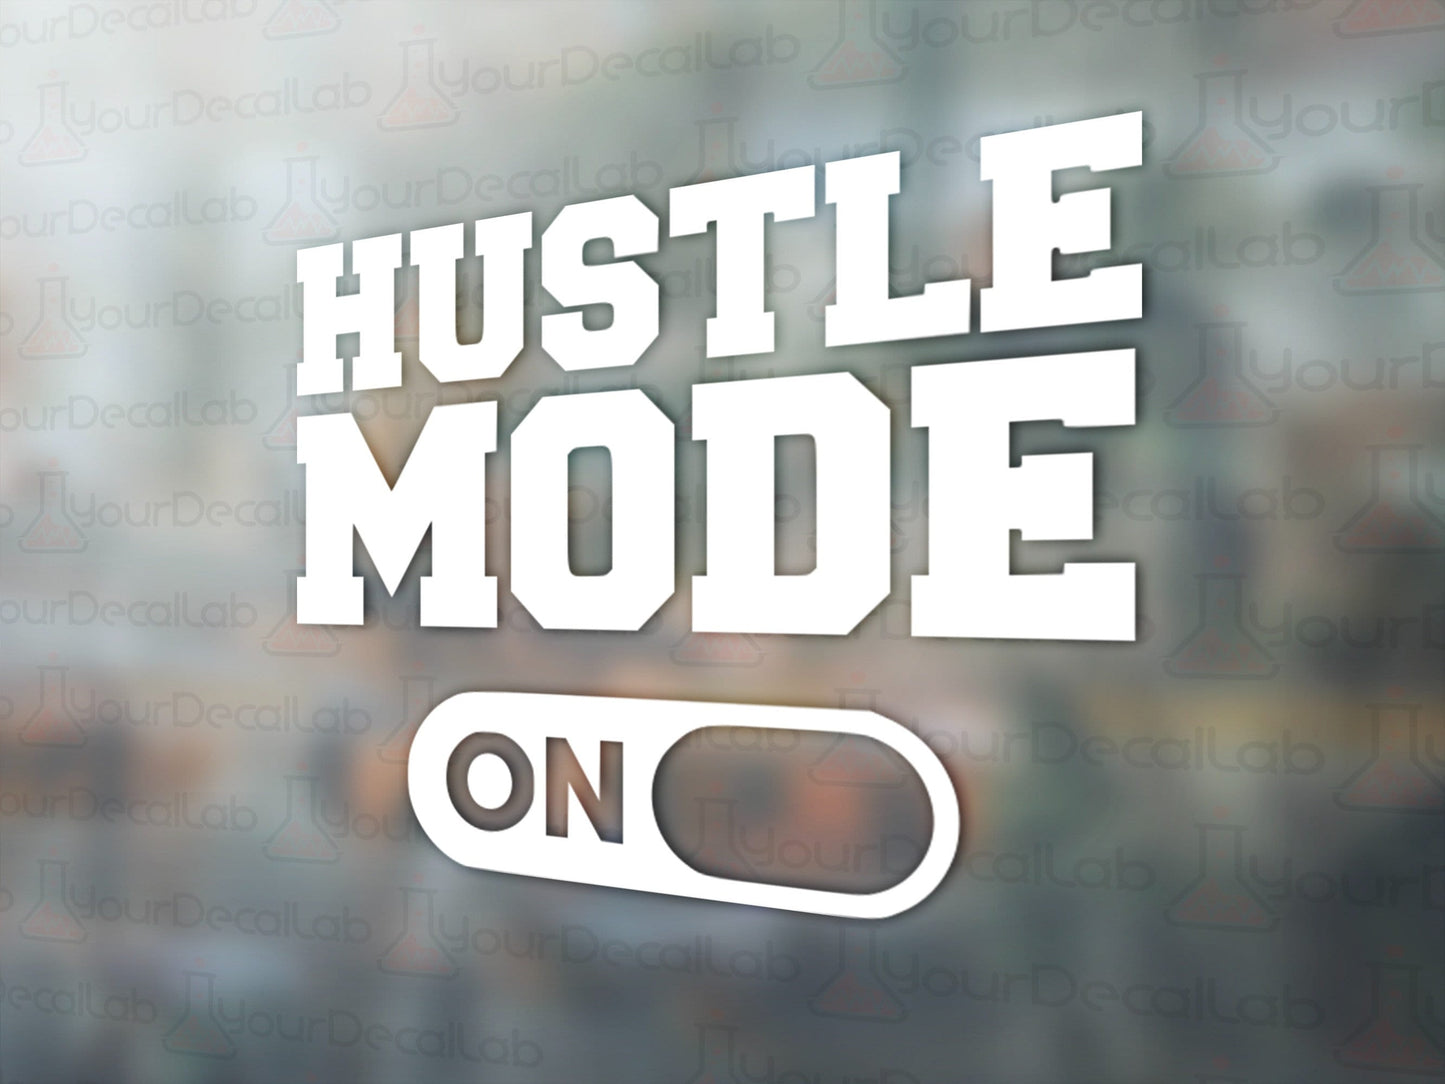 Hustle Mode ON Decal - Many Colors & Sizes